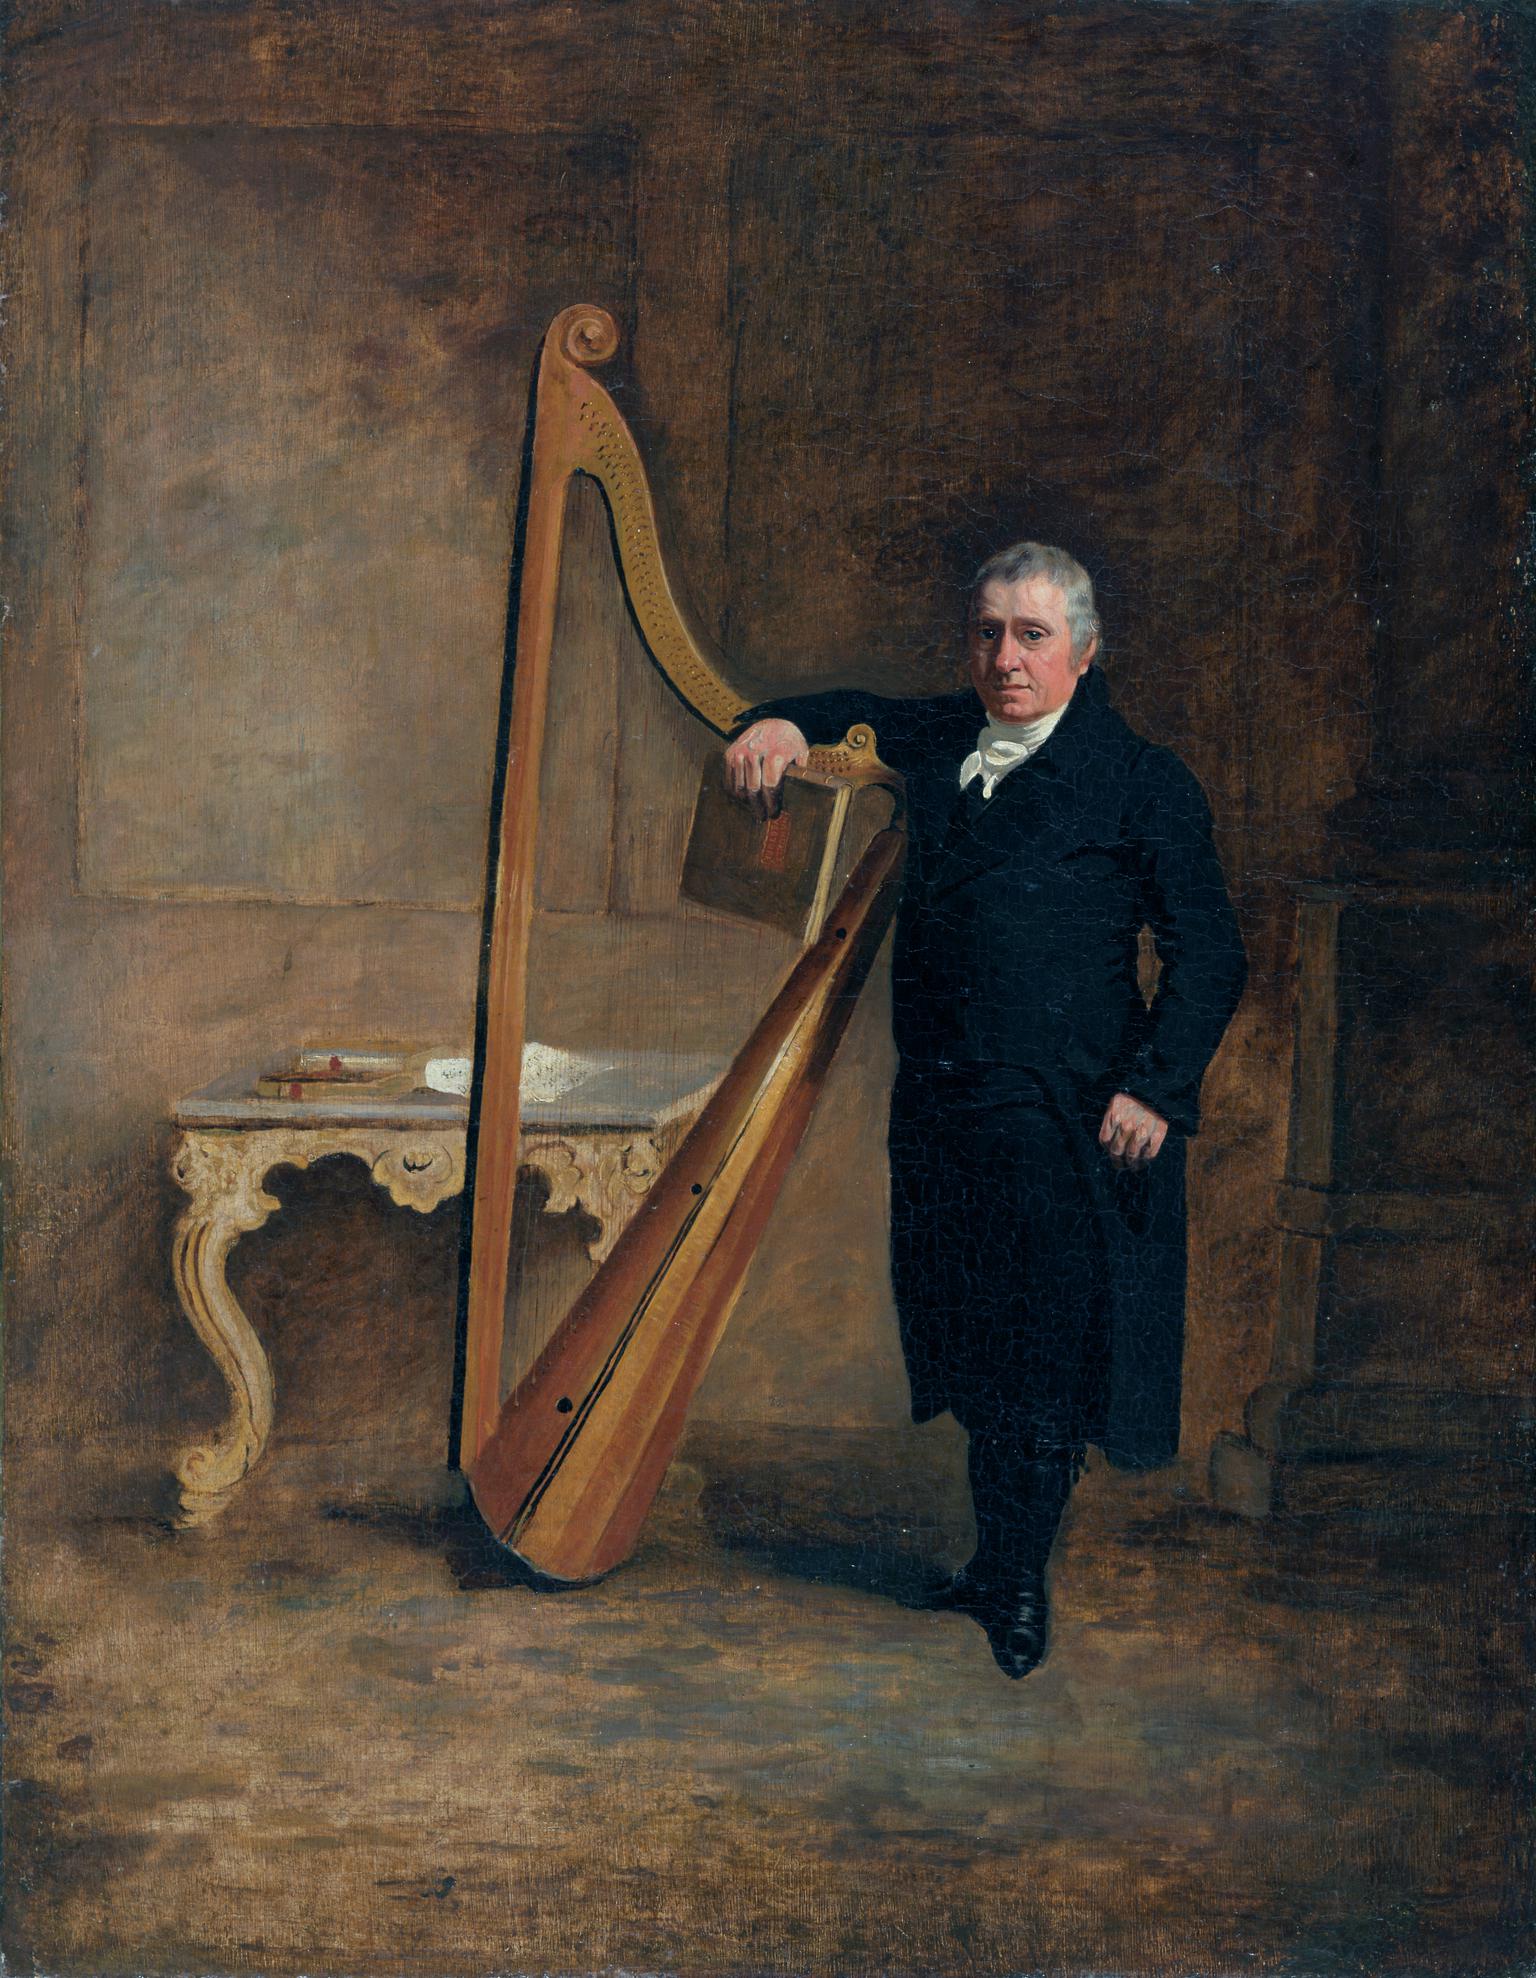 Griffith Owen, harpist to the Corbet family of Tywyn